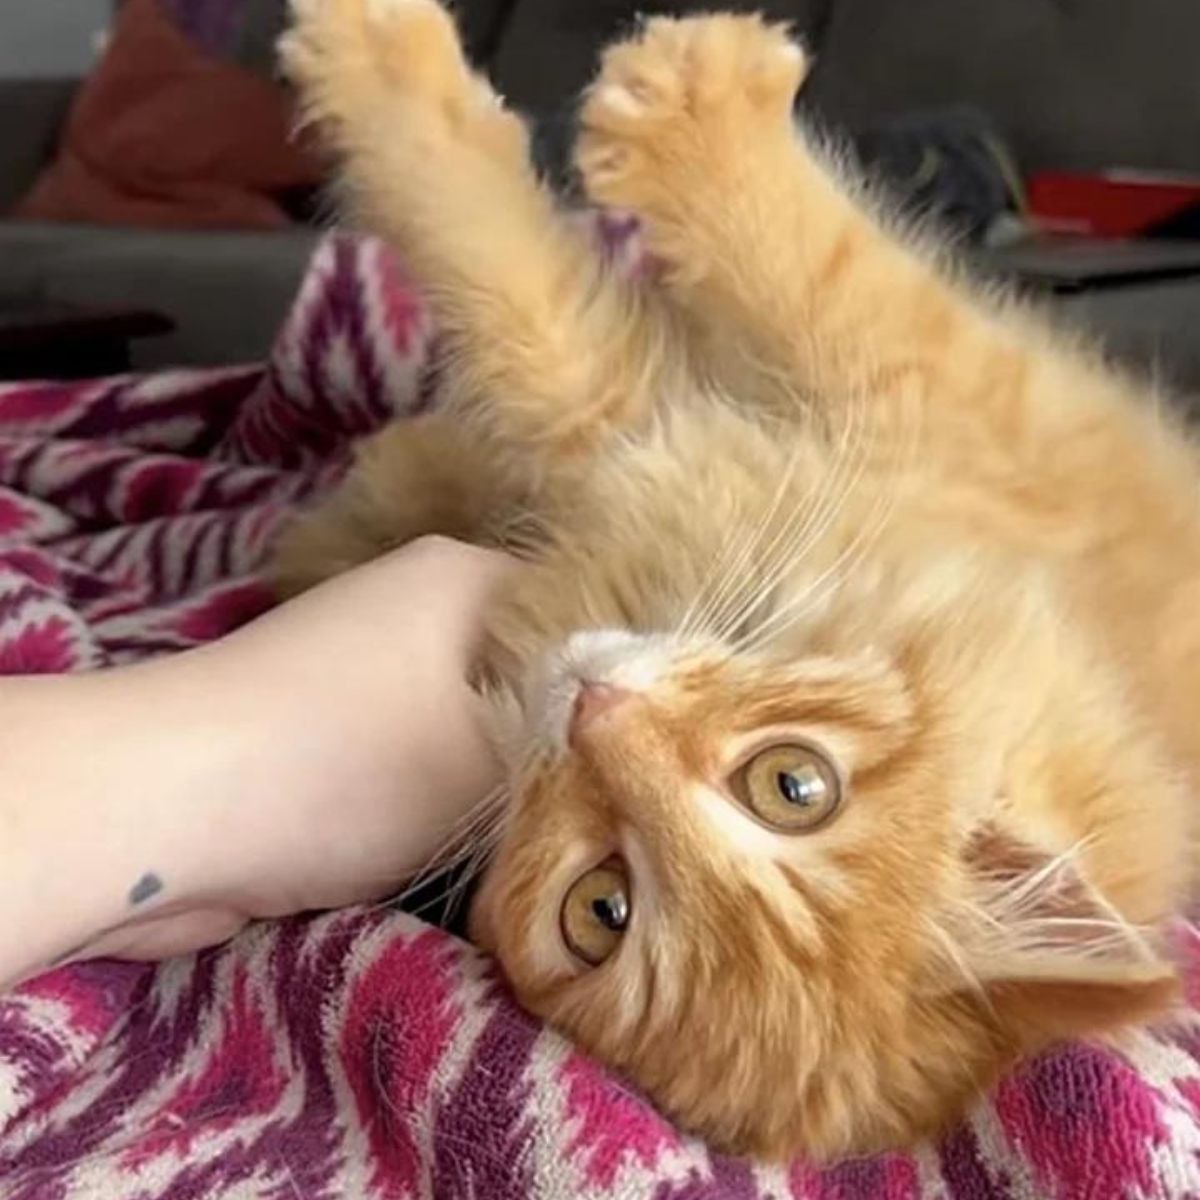 hand petting the kitten lying on its back